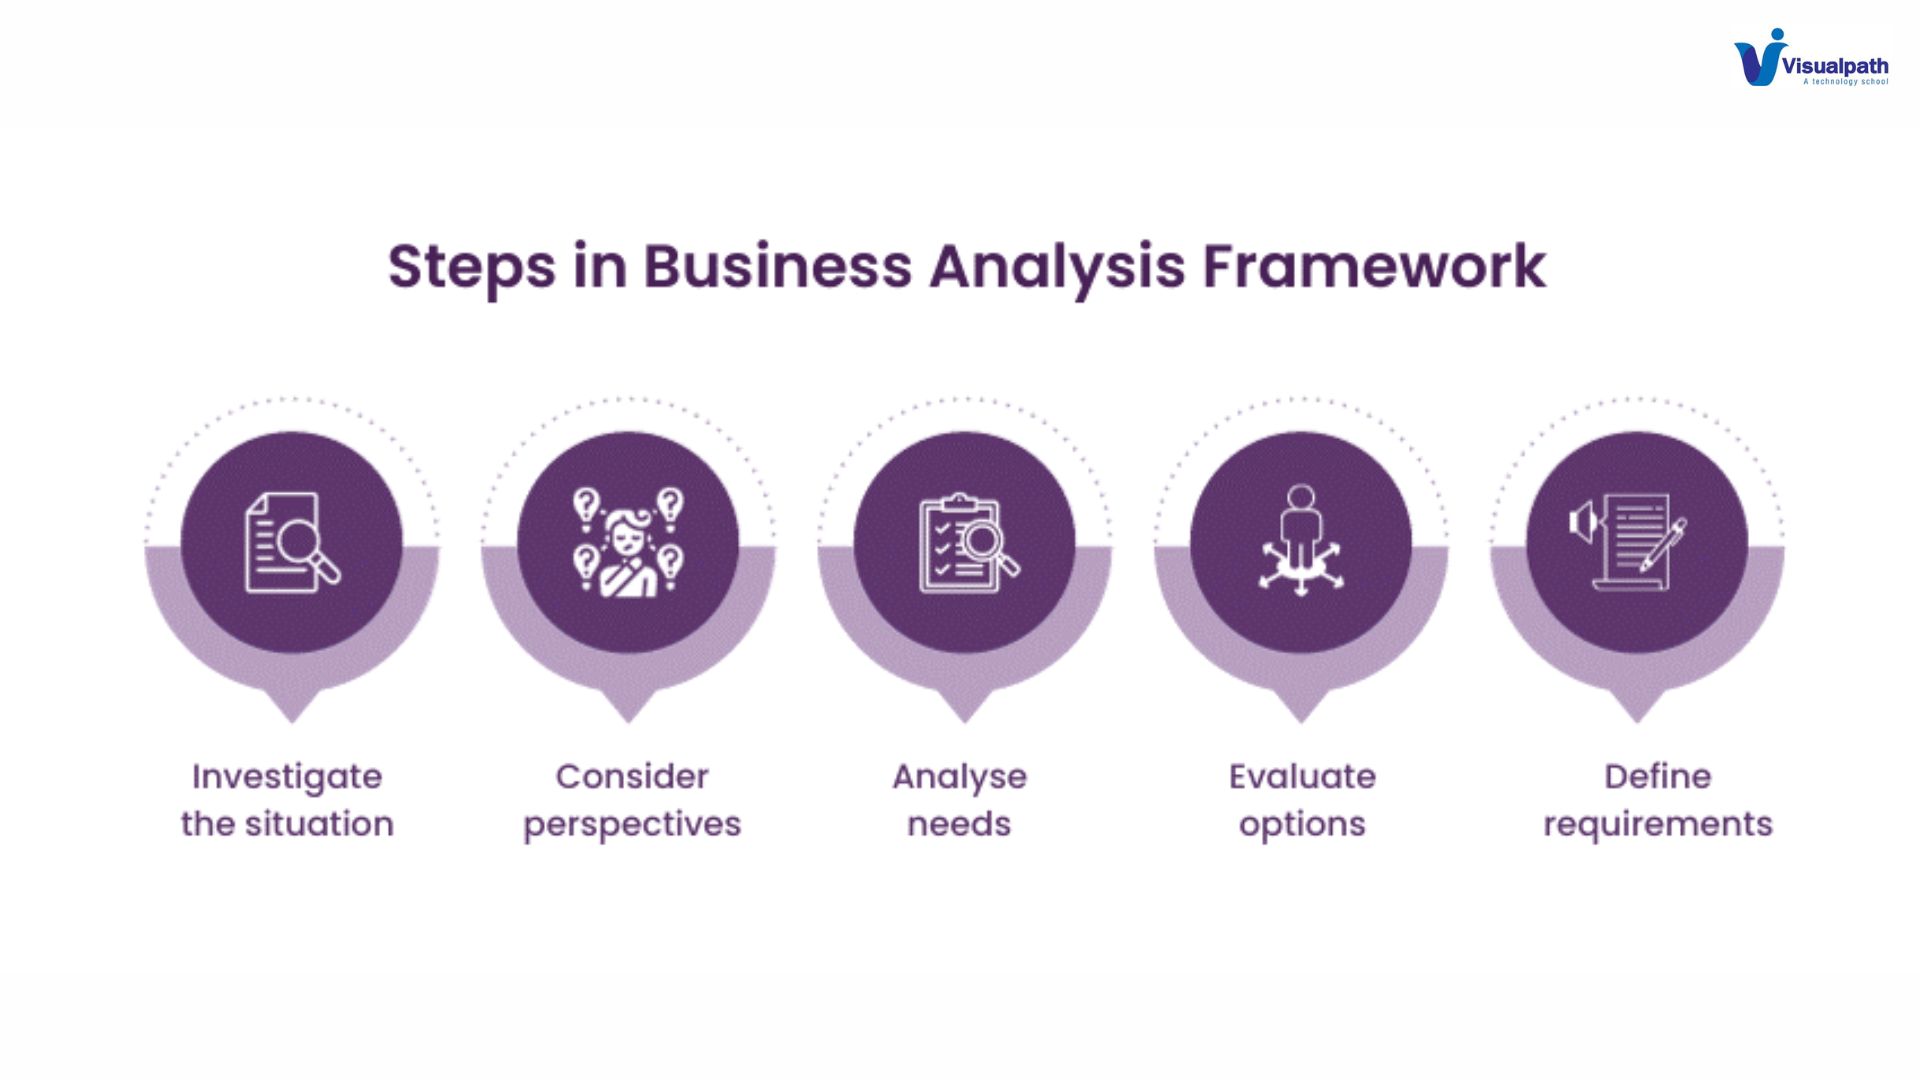 Business Analysis Life Cycle: Everything You Need To Know